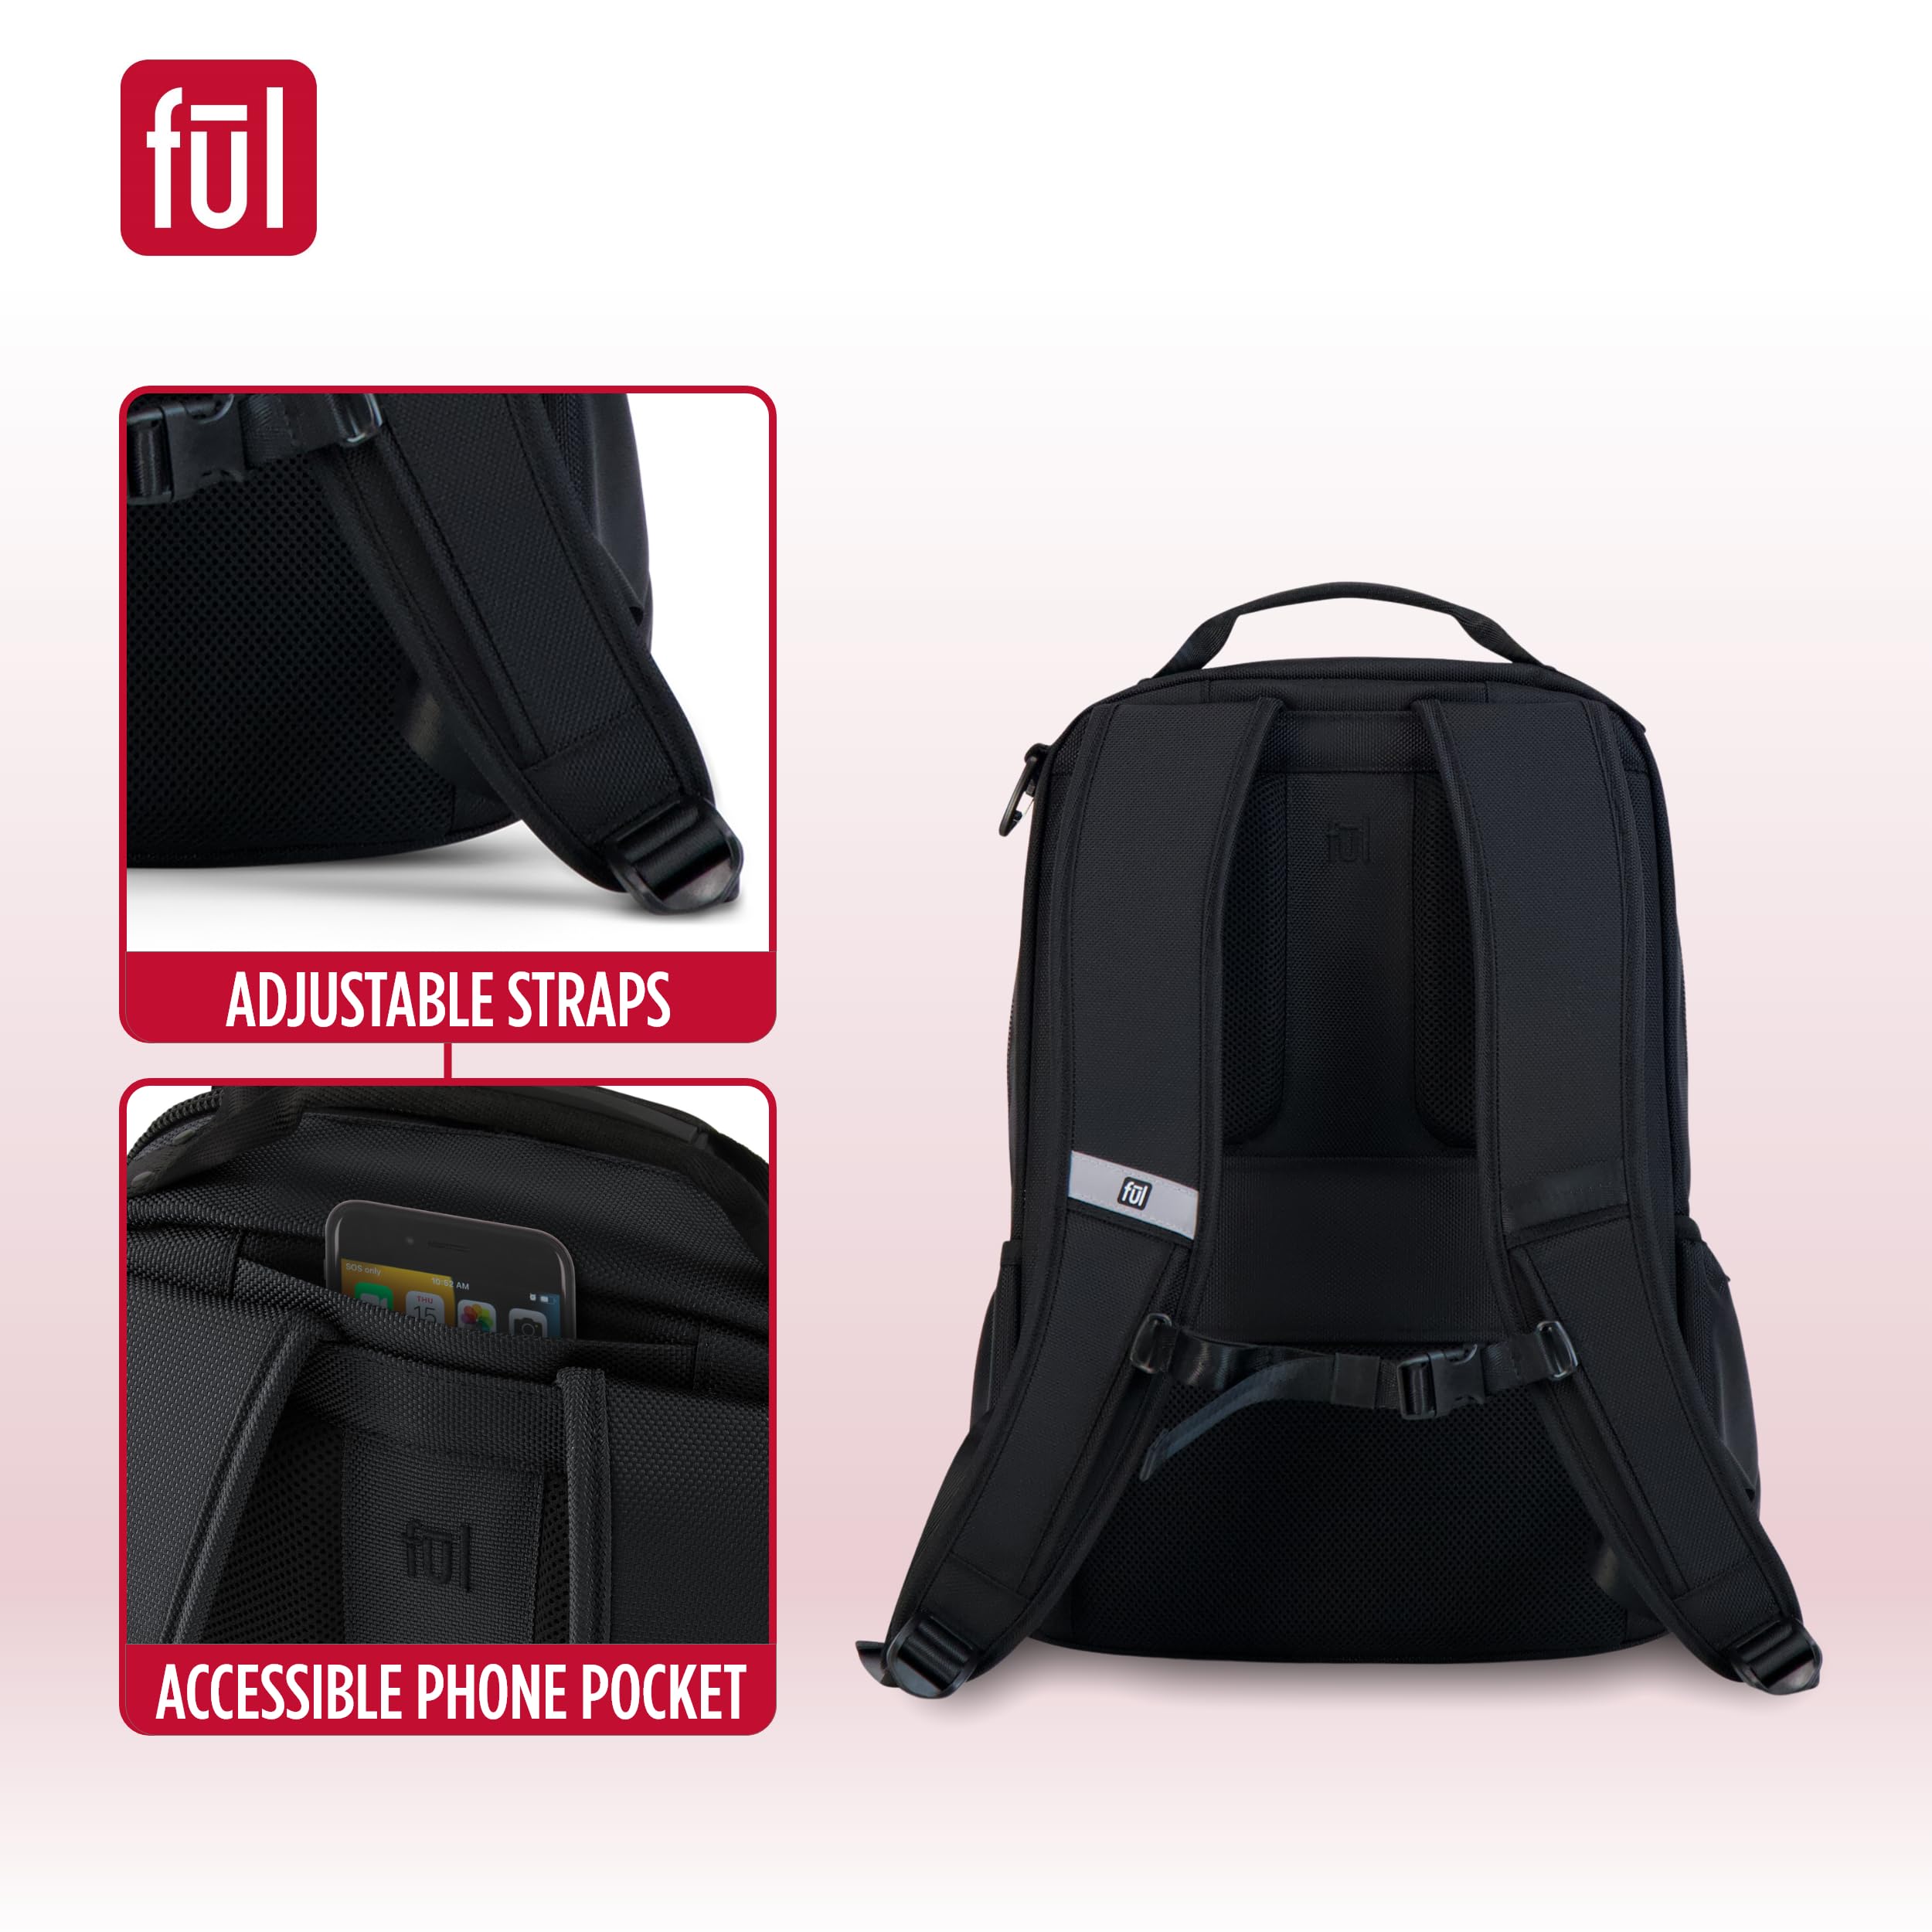 FUL Tactics Collection 15 Inch Laptop Backpack, Phantom Padded Computer Bag for Commute or Travel, Black